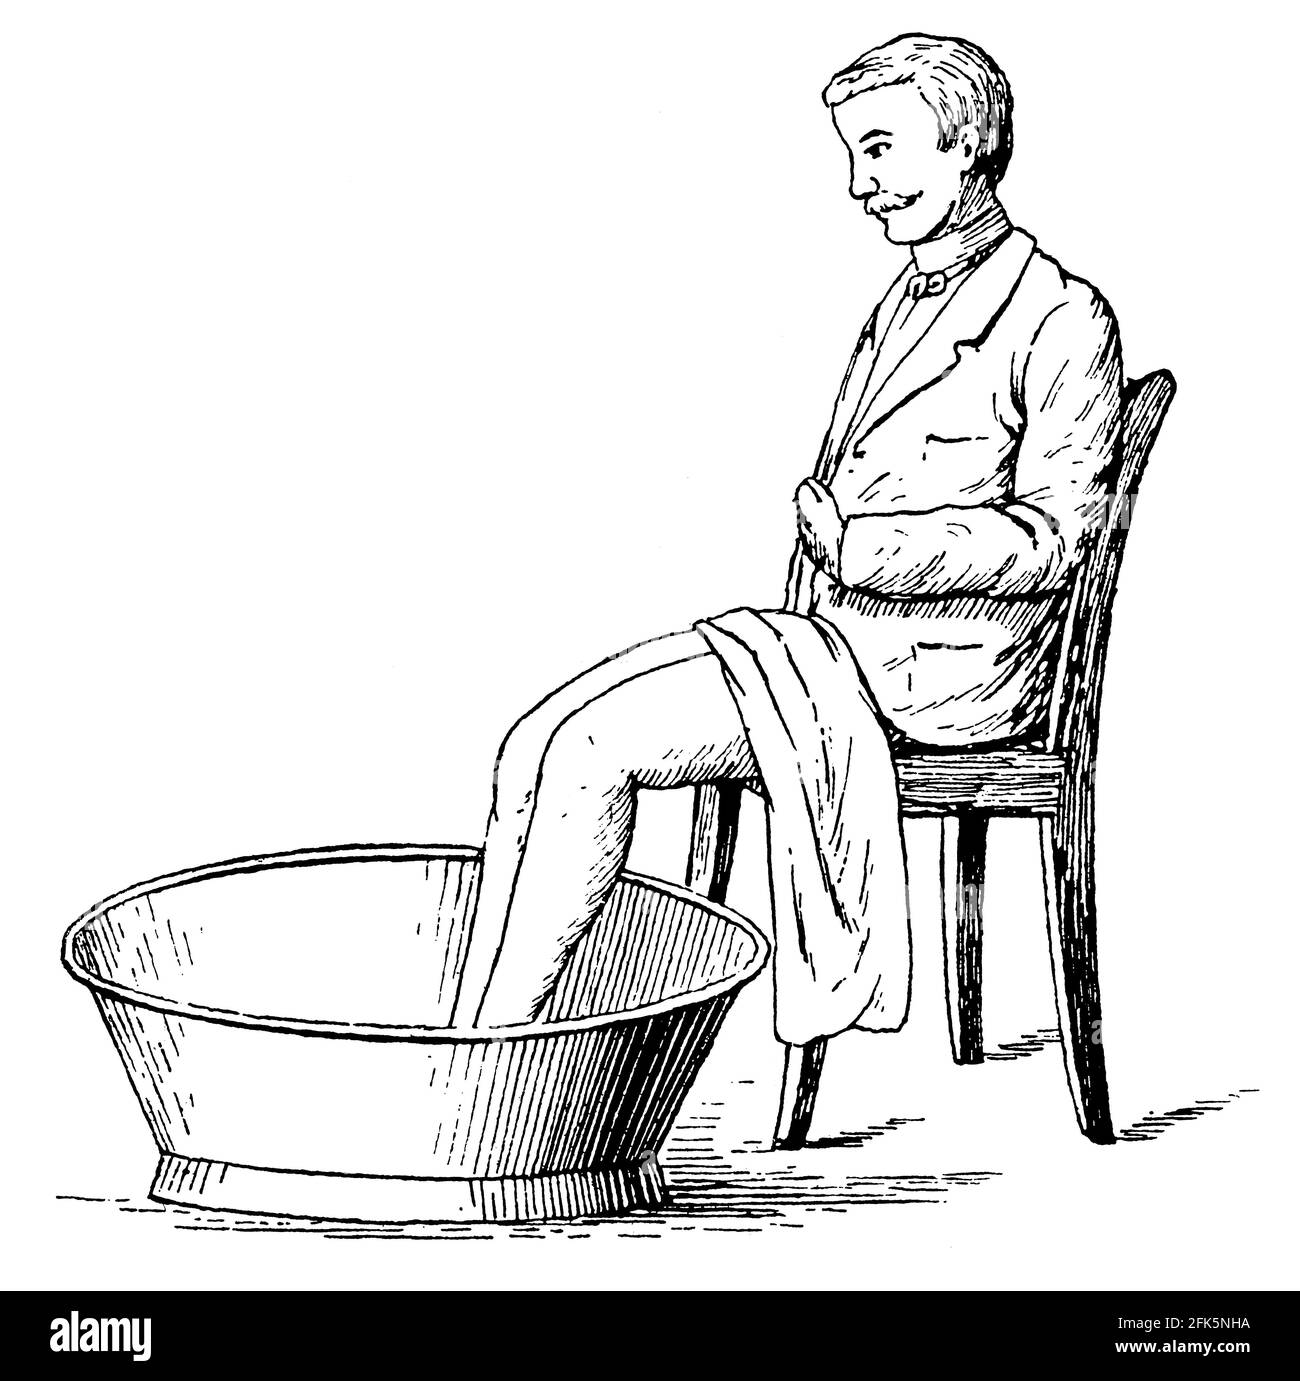 Foot bath. Illustration of the 19th century. Germany. White background. Stock Photo